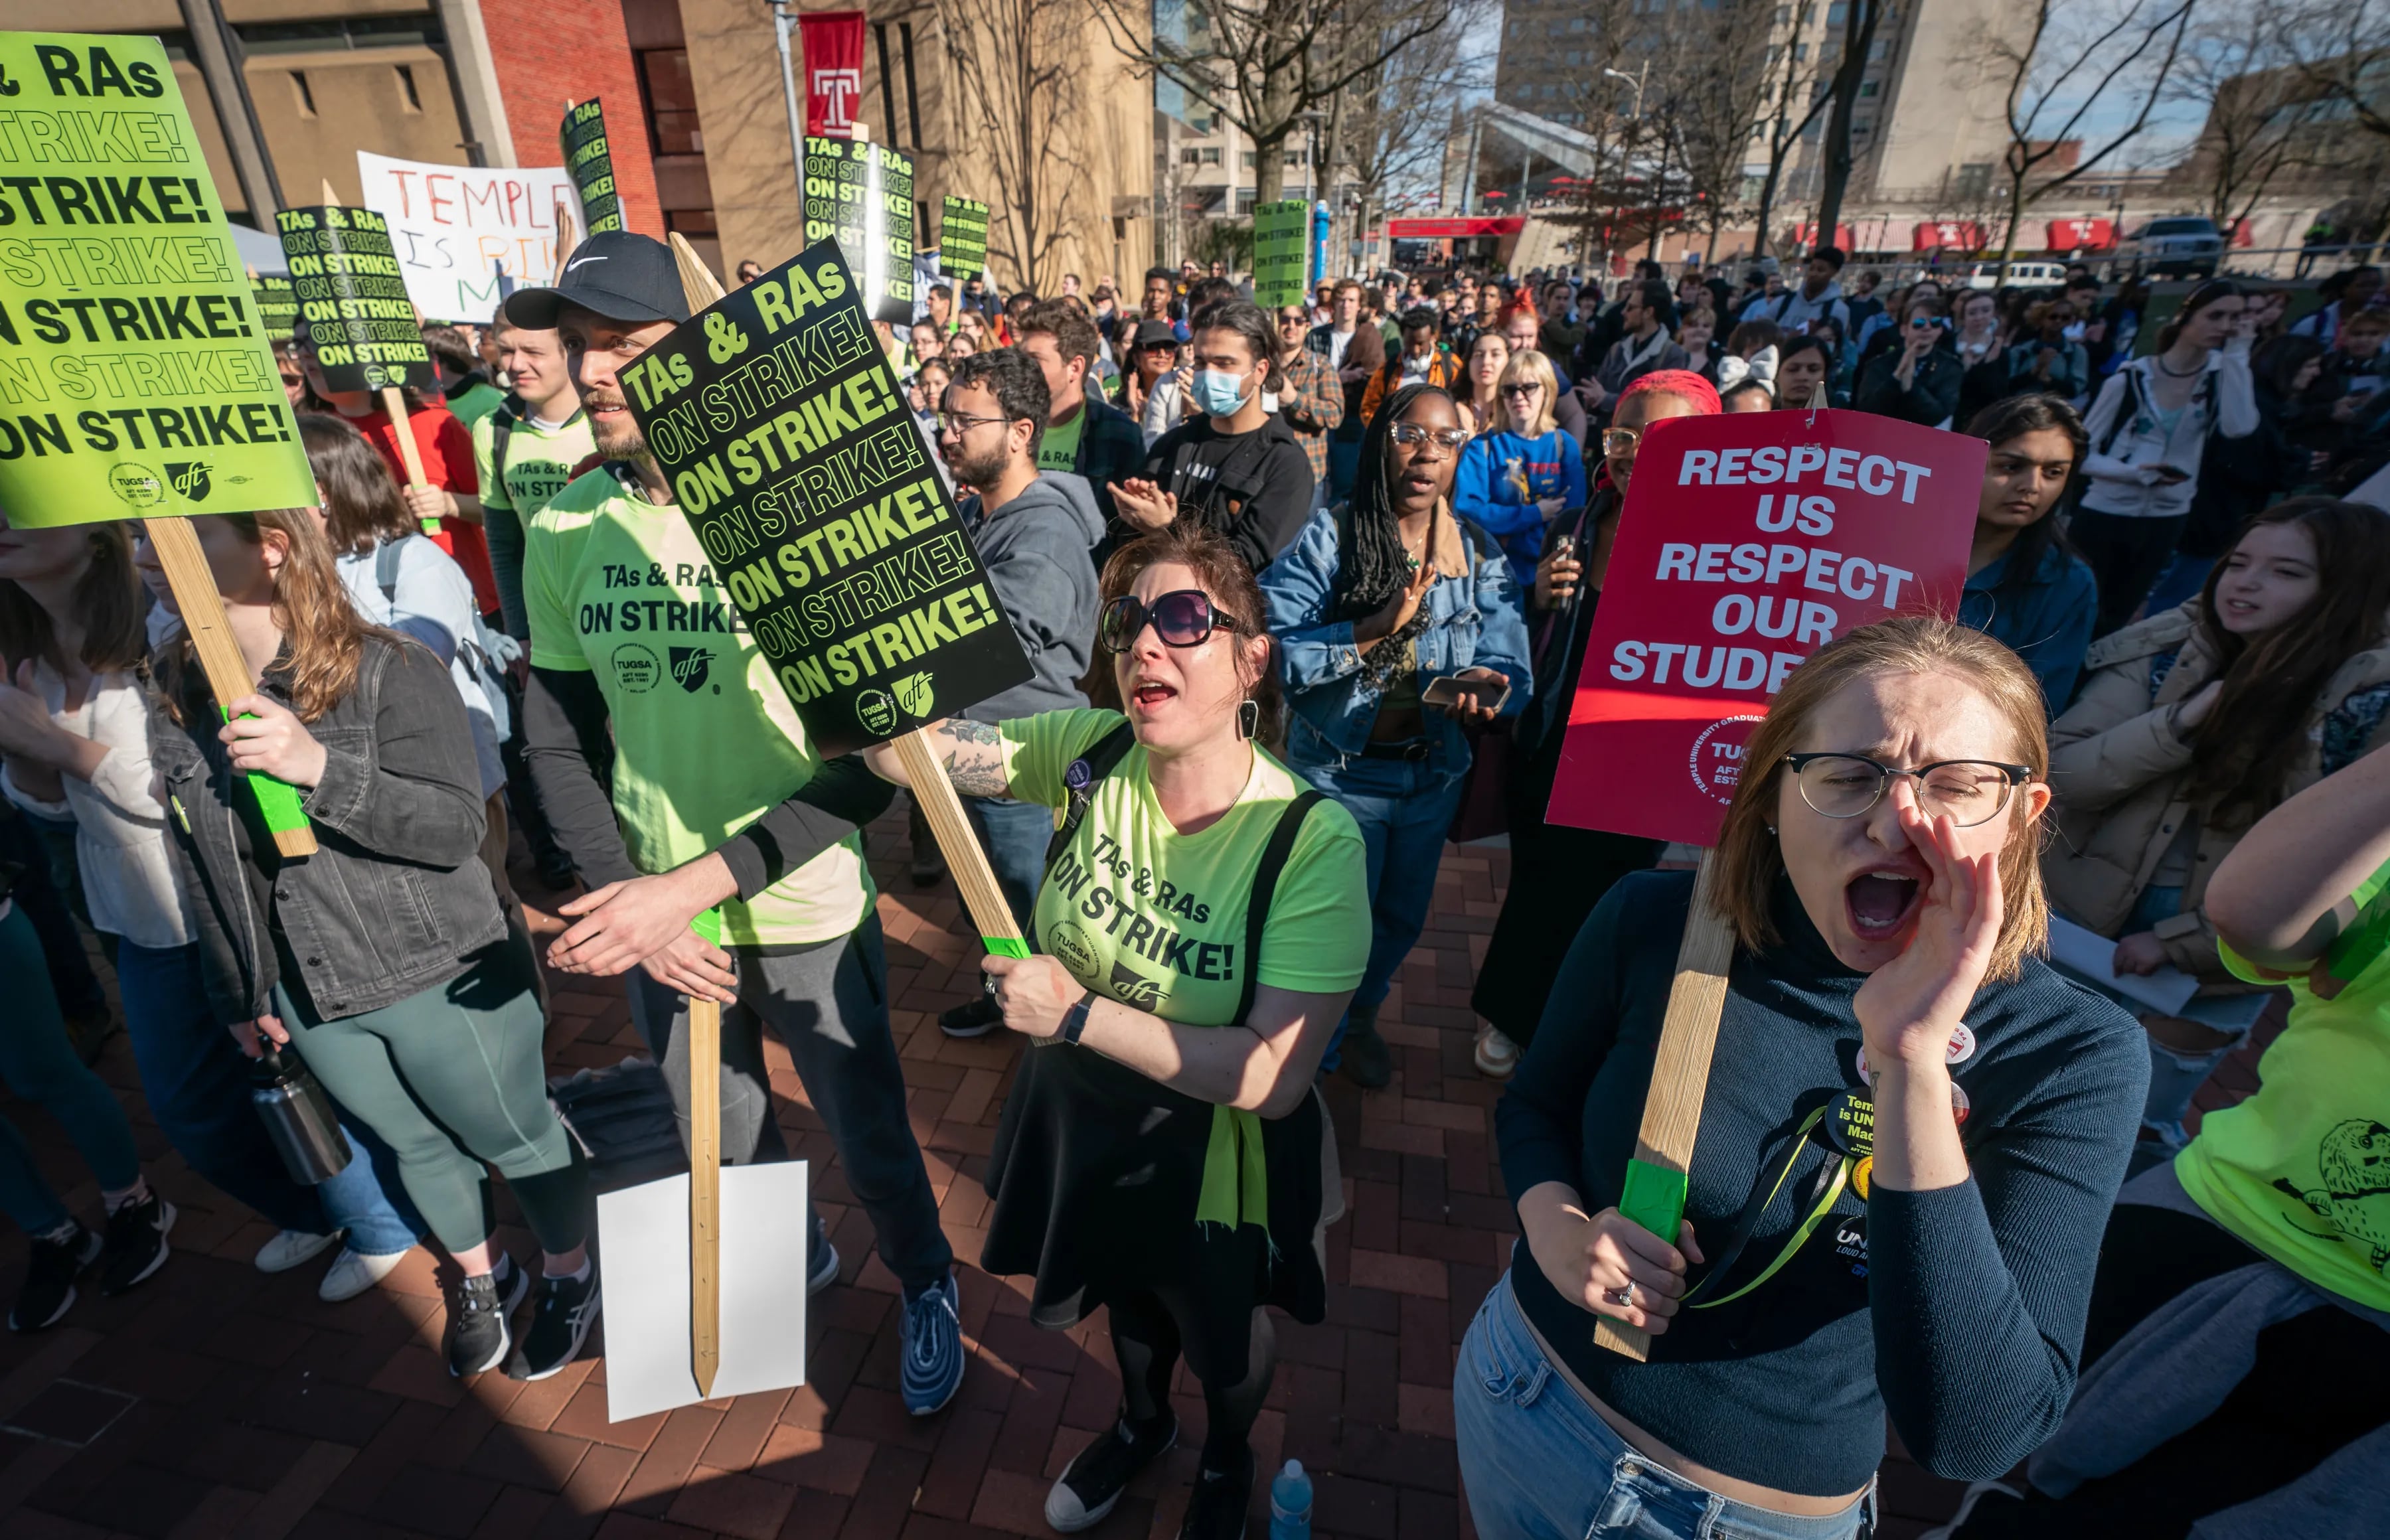 Ariel Natalo-Lifton (front center) and Laura Waters (front right), TUGSA vice president, protest at Temple University where students walked out of class on Wednesday, Feb. 15, 2023, in Philadelphia, in support of the teaching assistants and research assistants, some of whom are on strike.